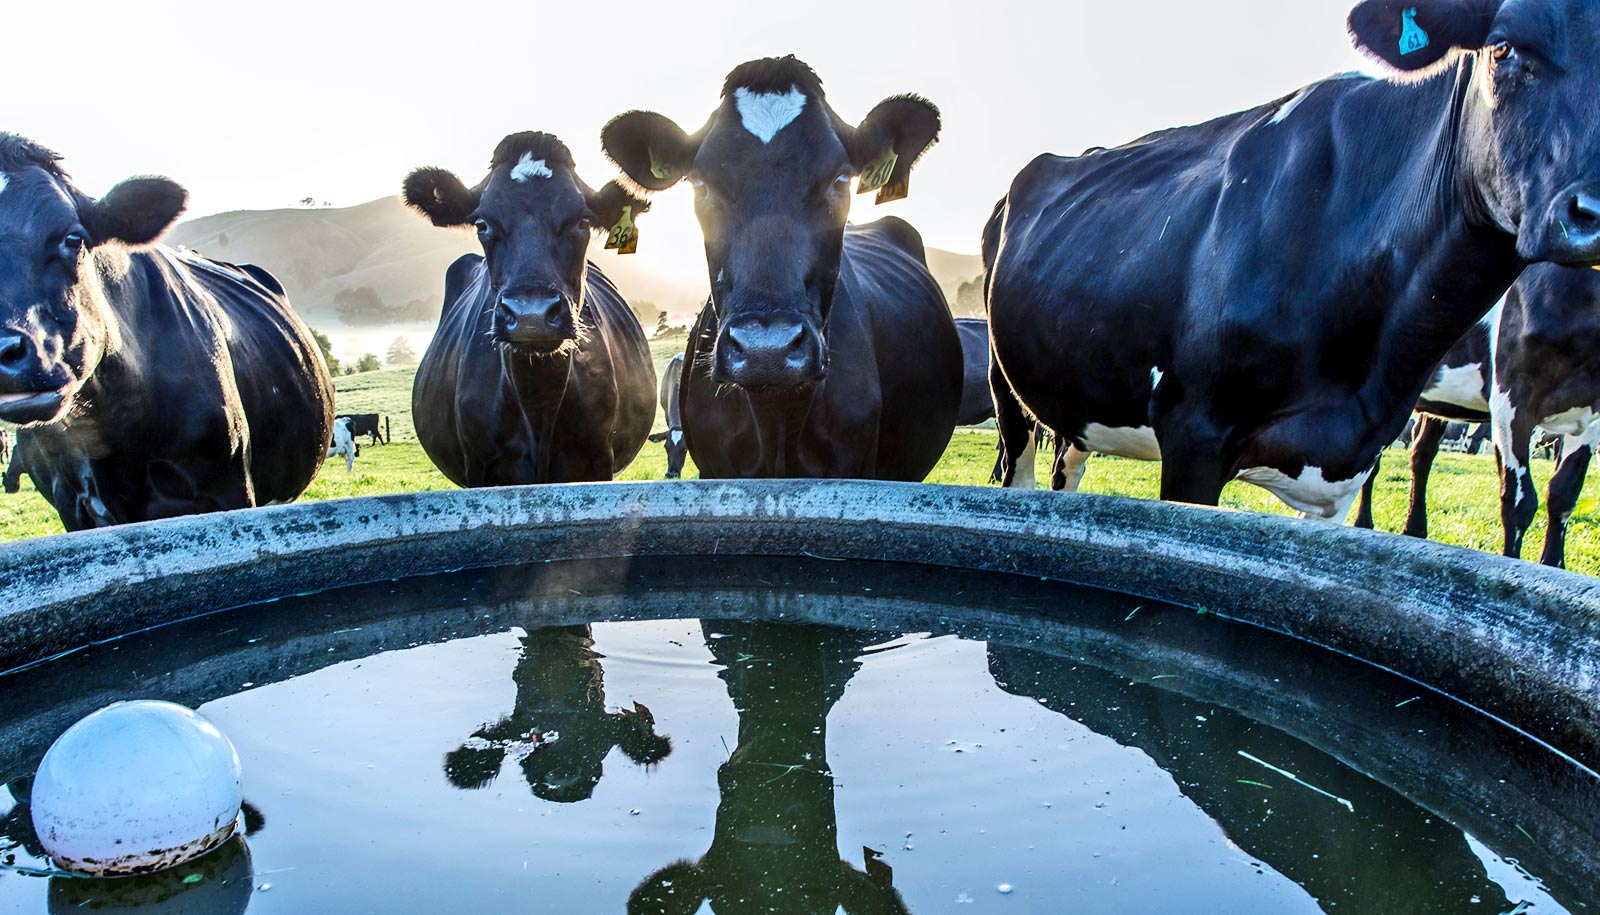 Cows pick up E. coli from farm water troughs